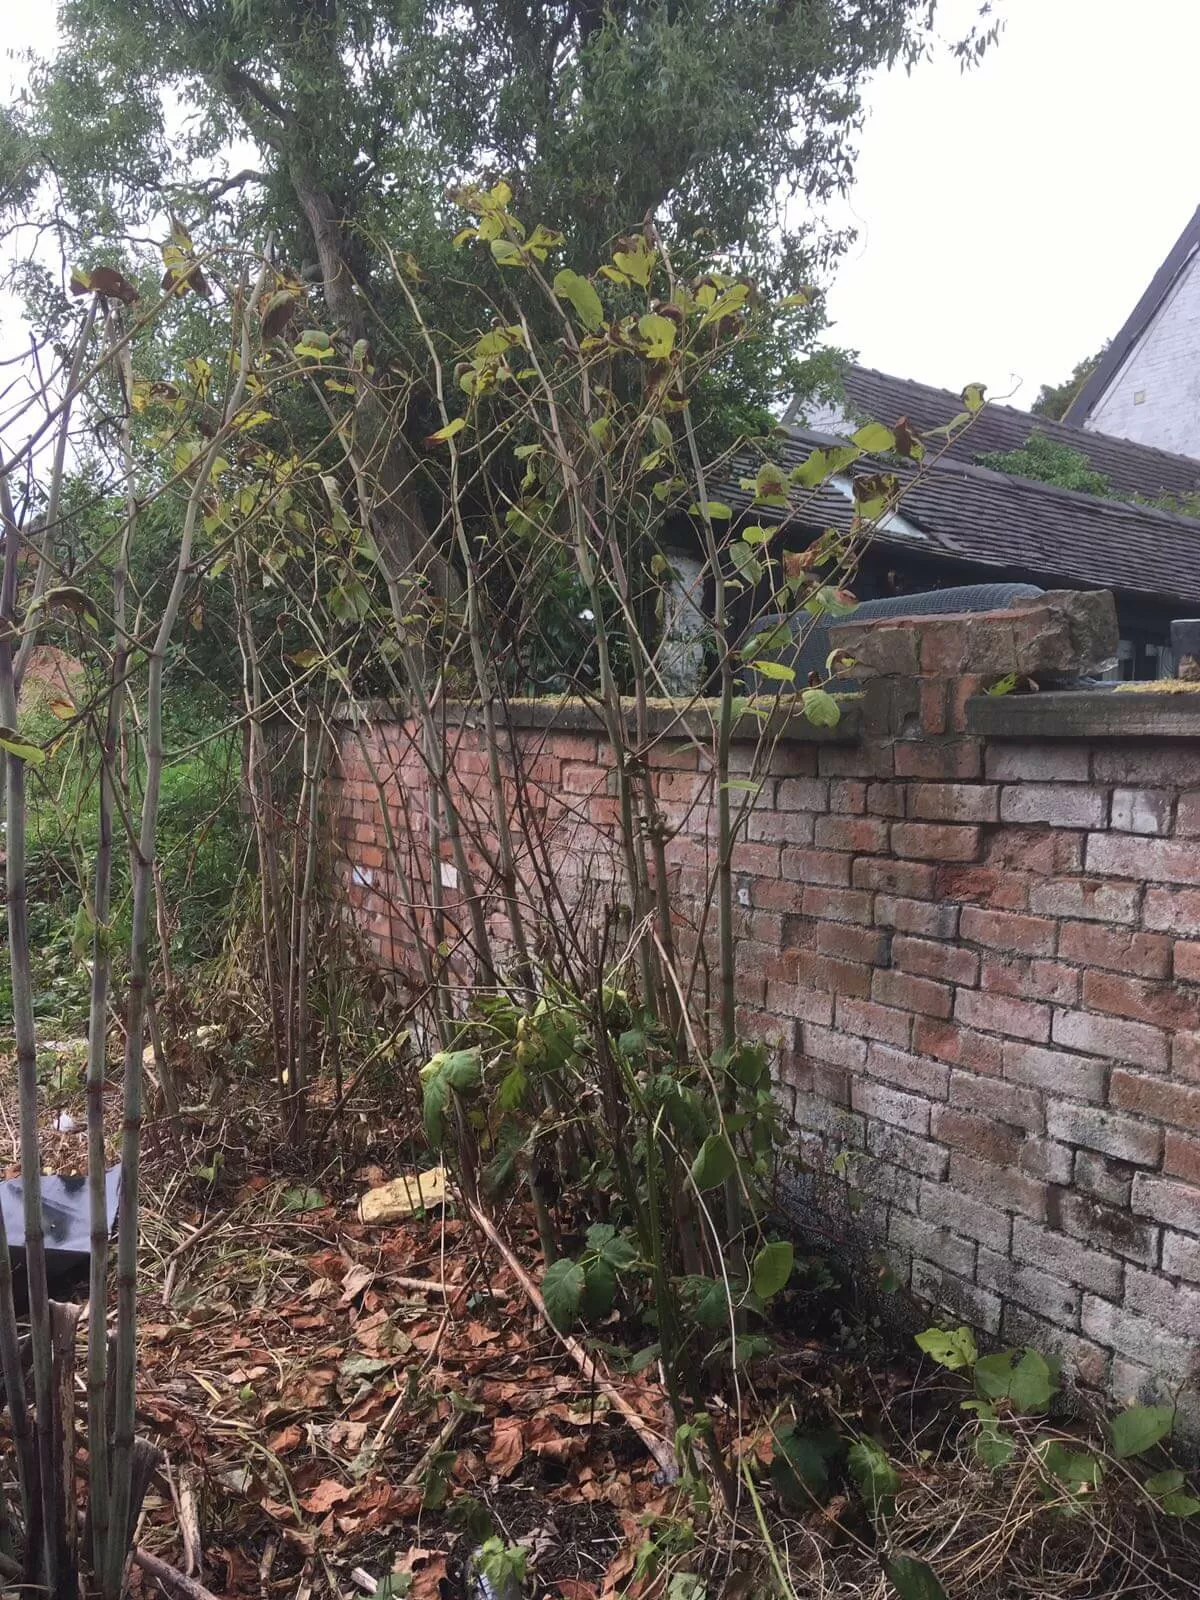 Removal of Japanese Knotweed in Brierley Hill